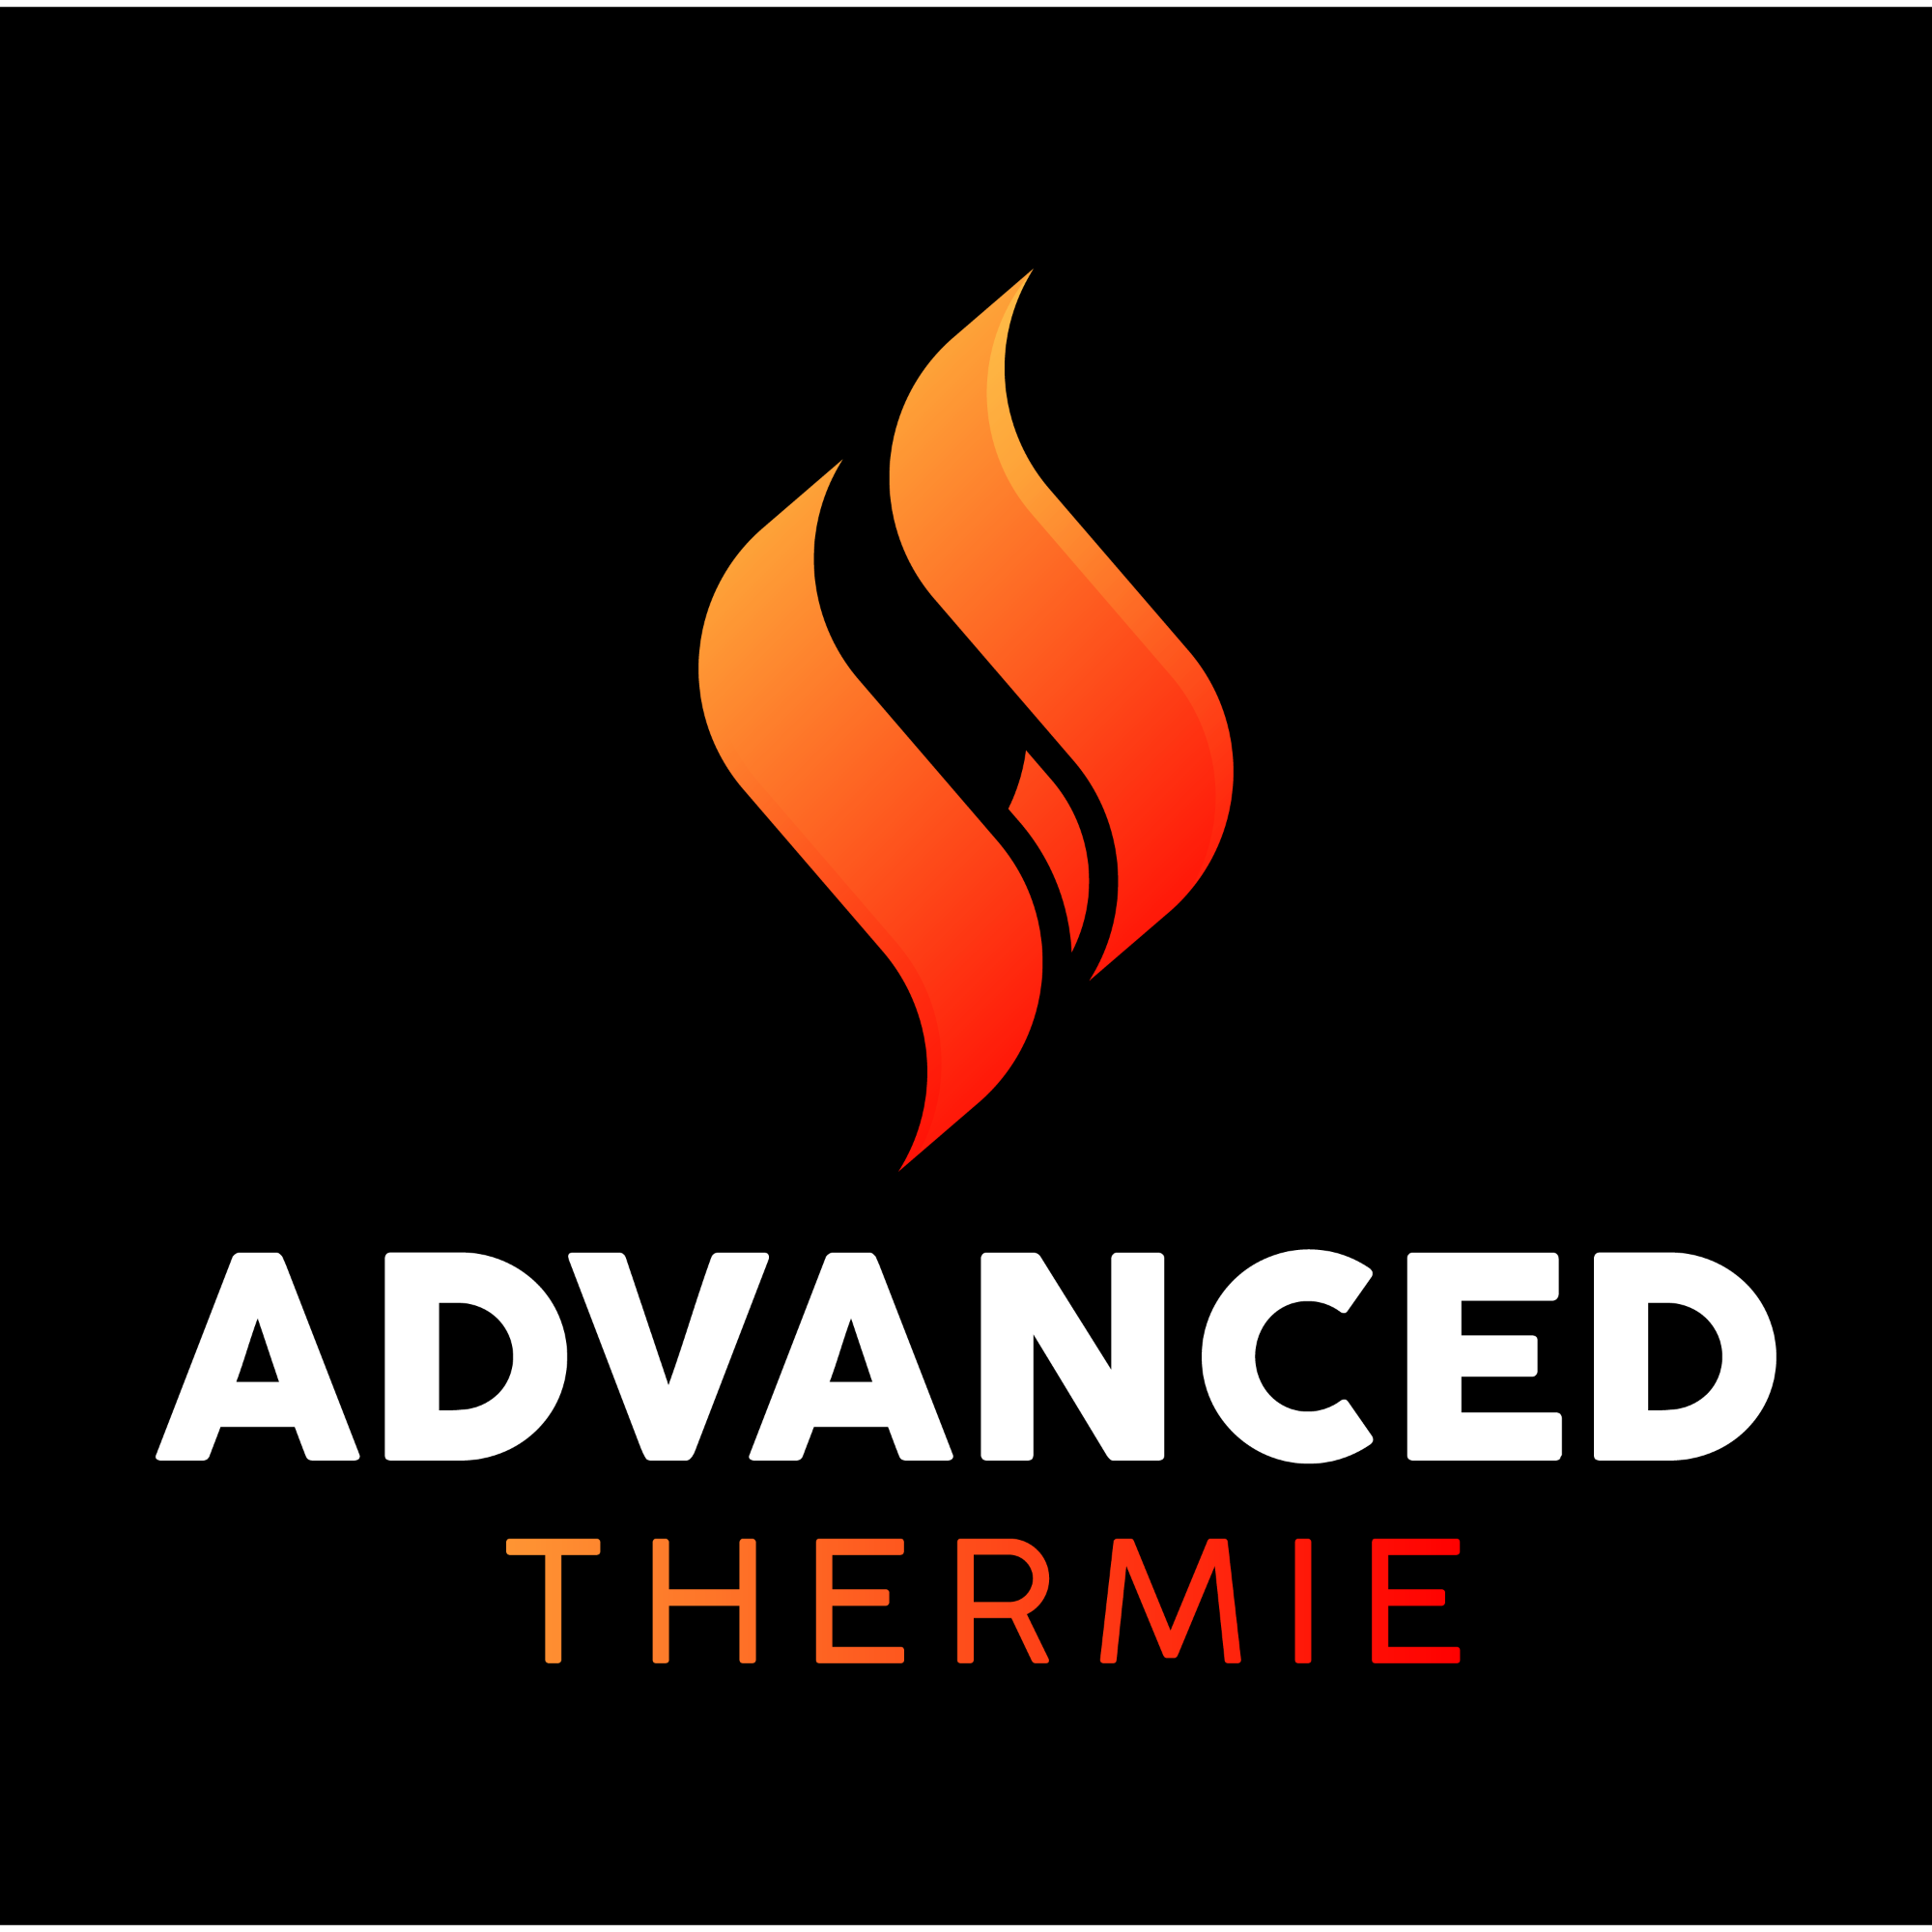 ADVANCED THERMIE